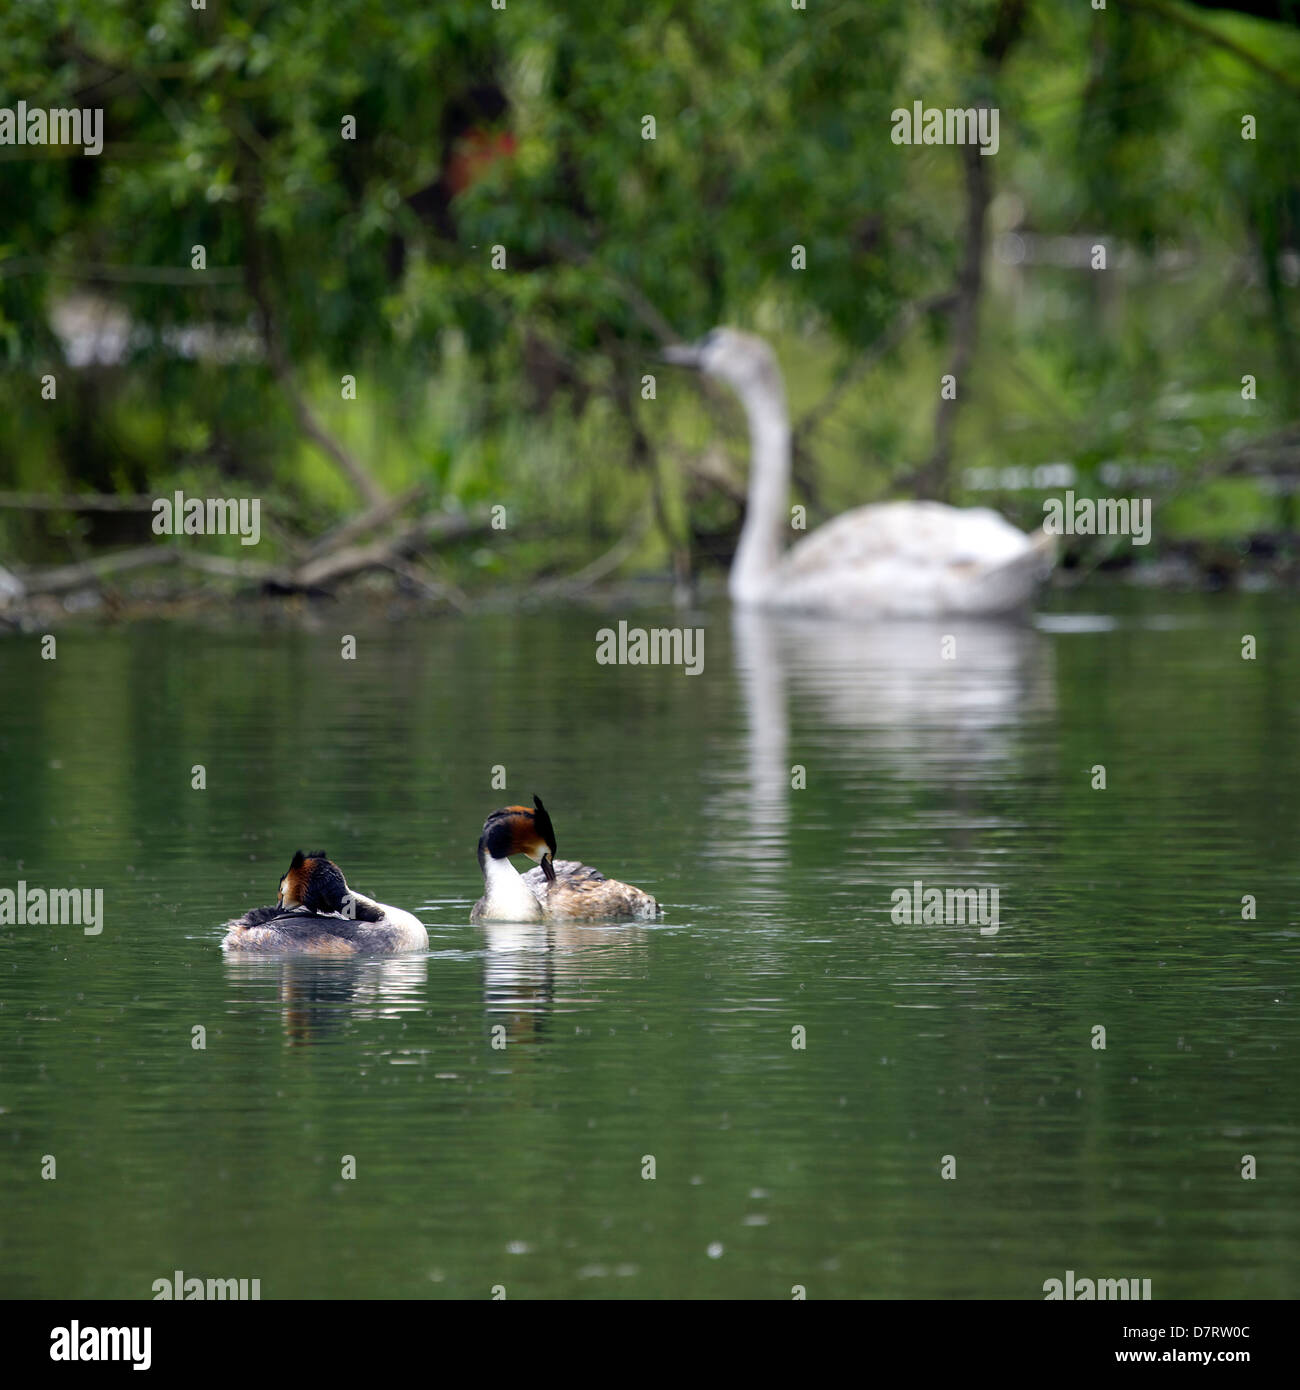 Pair of Great Crested Grebe (Podiceps cristatus) common water bird fowl grebes life wildlife nature natural ornithology Stock Photo